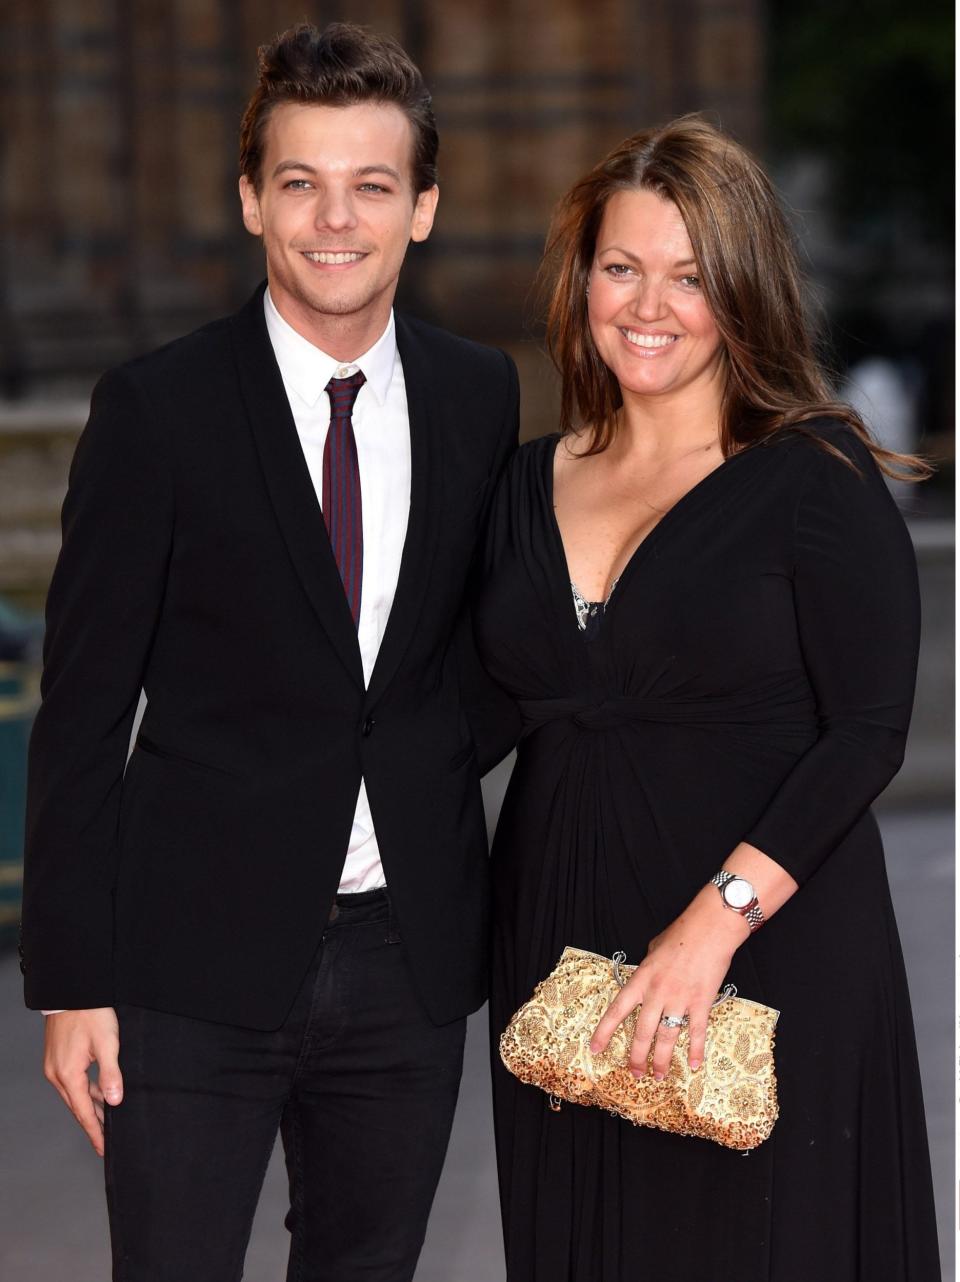 Louis Tomlinson with his mother Johannah Deakin who died of leukaemia in 2016 - David Fisher/Shutterstock